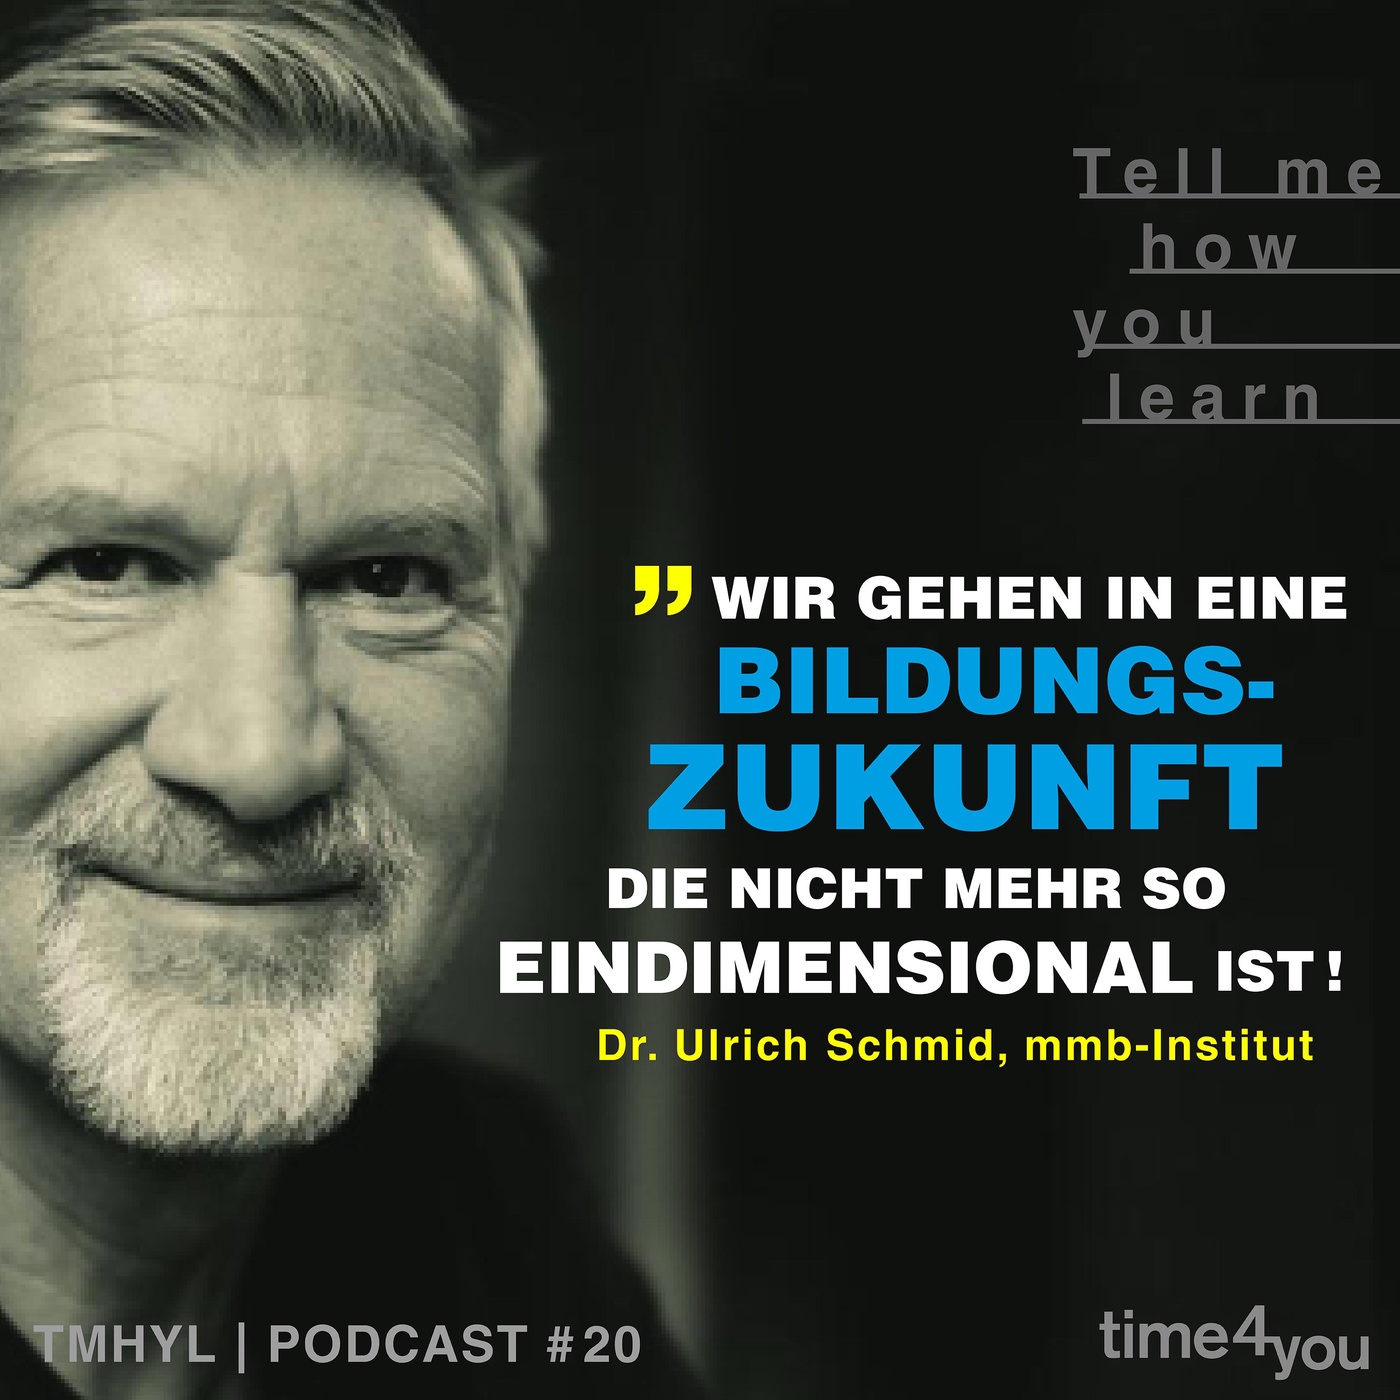 Tell me how you learn - Dr. Ulrich Schmid